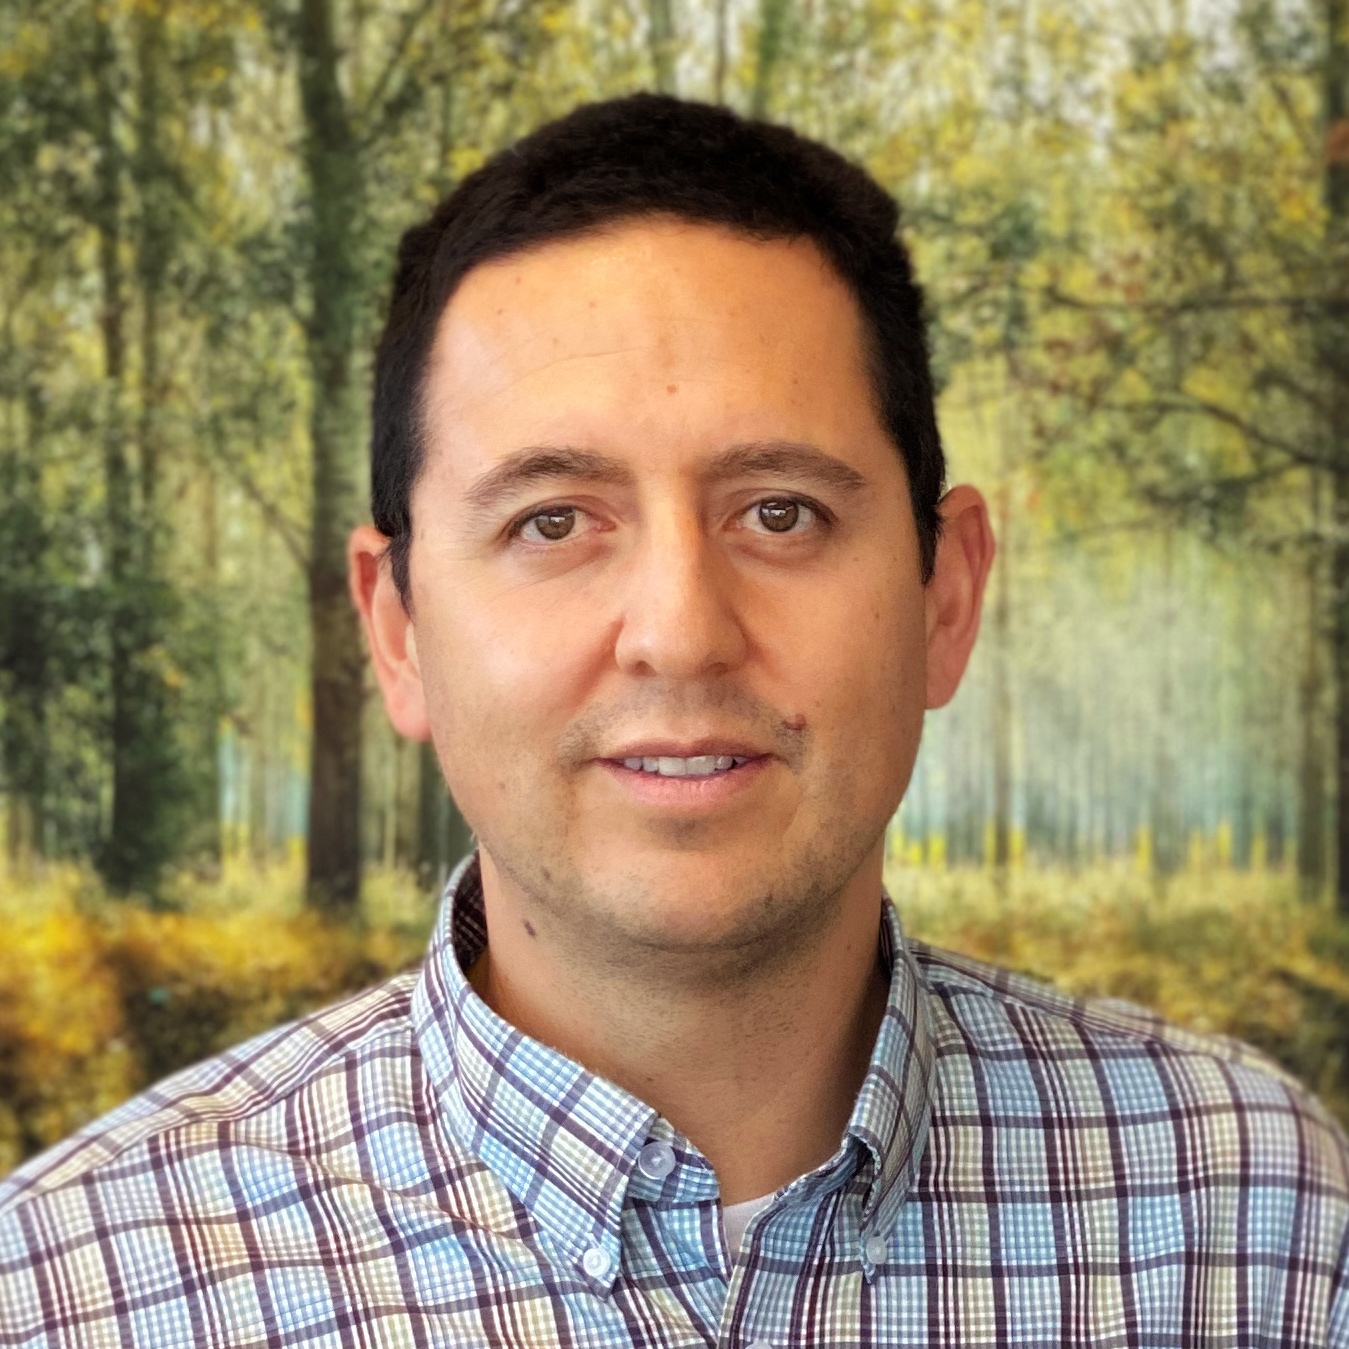 An photograph of Dr. Carlos Canales, a licensed Clinical Psychologist, Certified Group Psychotherapist, and Somatic Experiencing Practitioner in private practice.